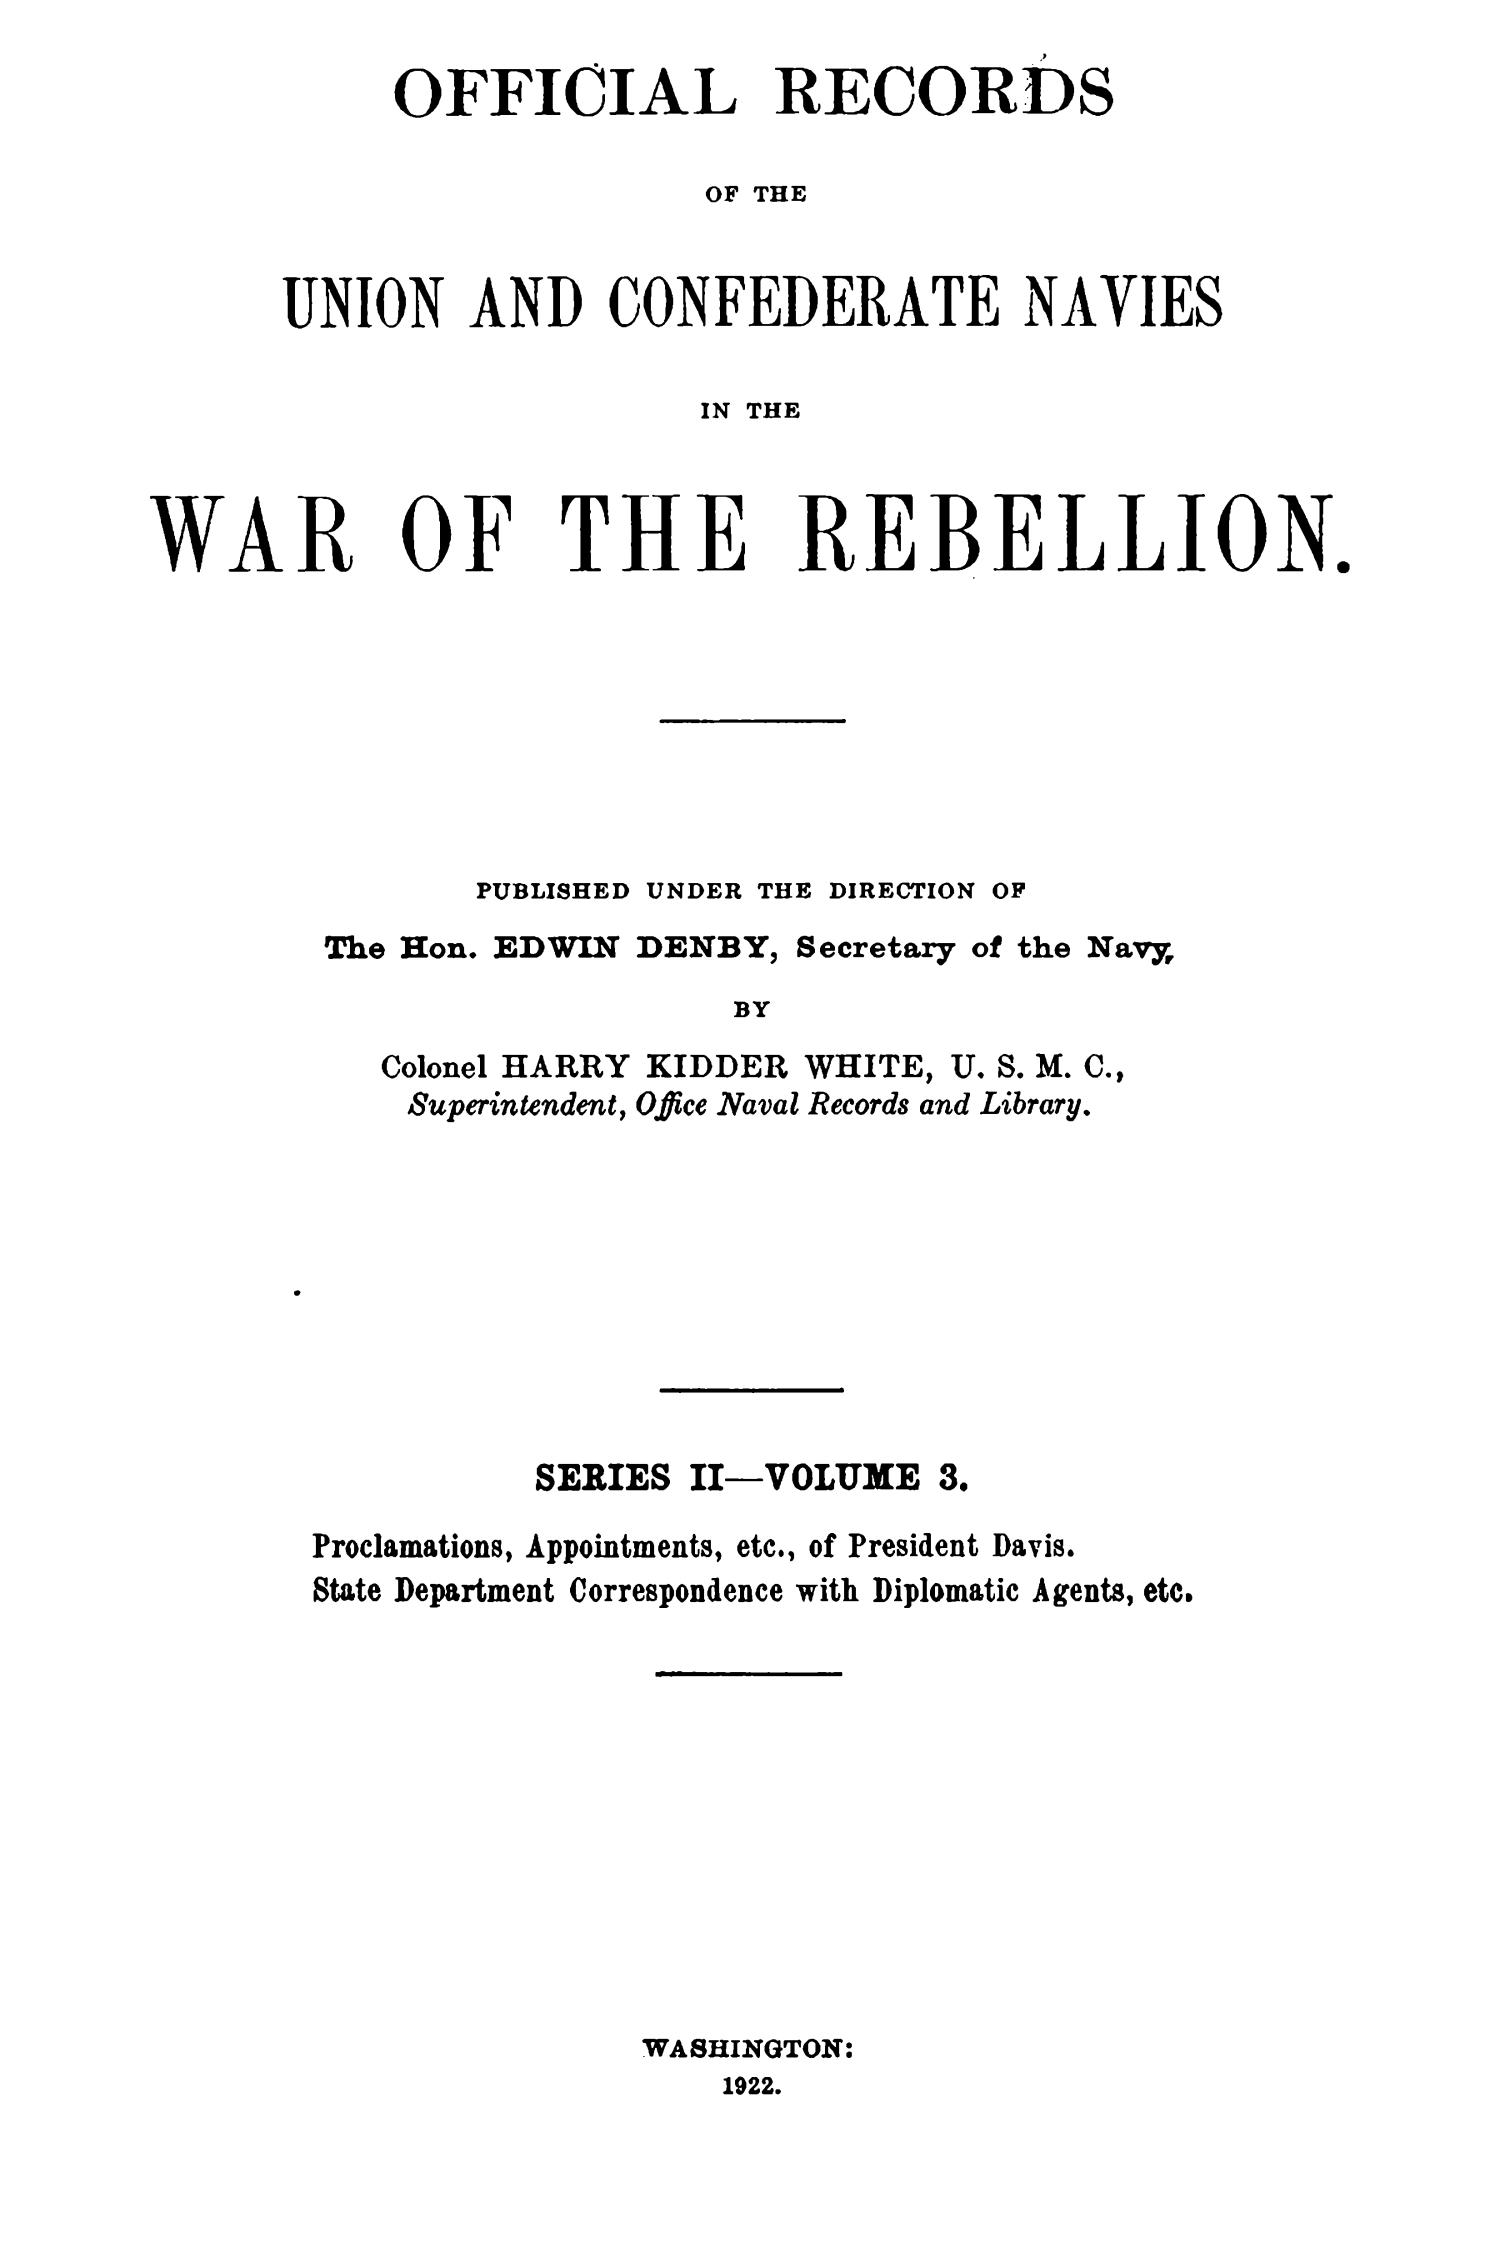 Official Records of the Union and Confederate Navies in the War of the Rebellion. Series 2, Volume 3.
                                                
                                                    Title Page
                                                